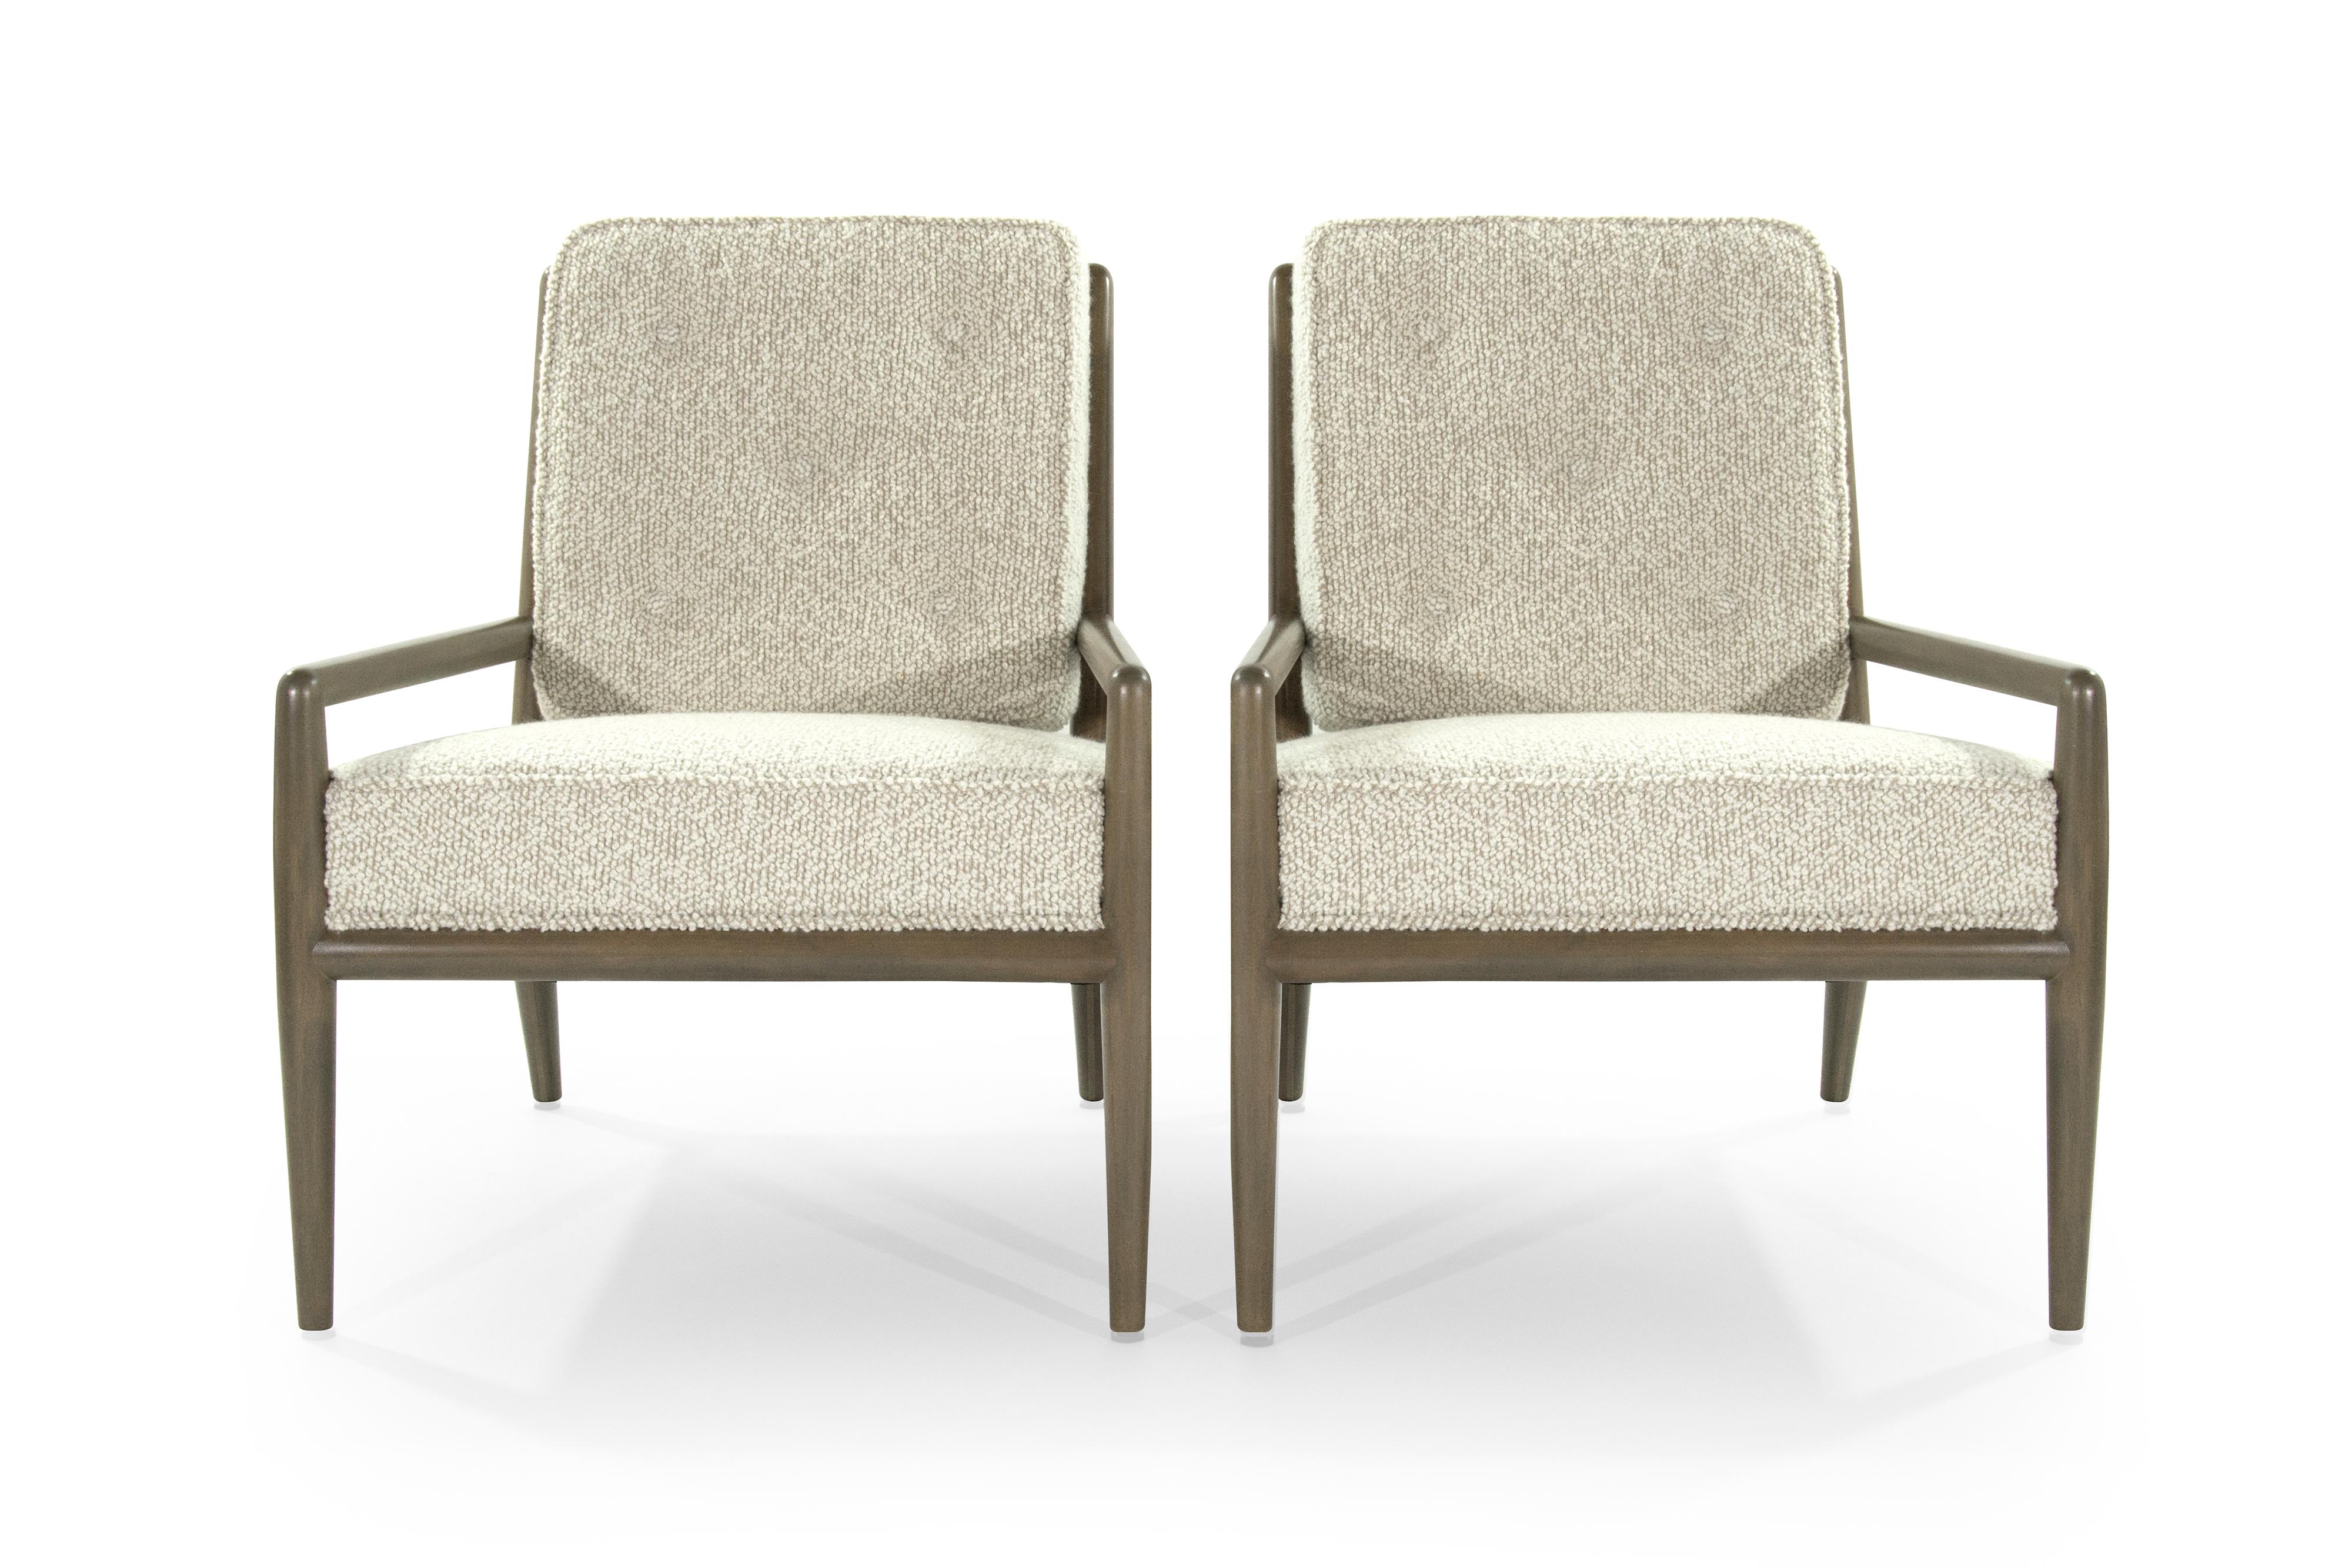 20th Century Classic Lounge Chairs by T.H. Robsjohn-Gibbings